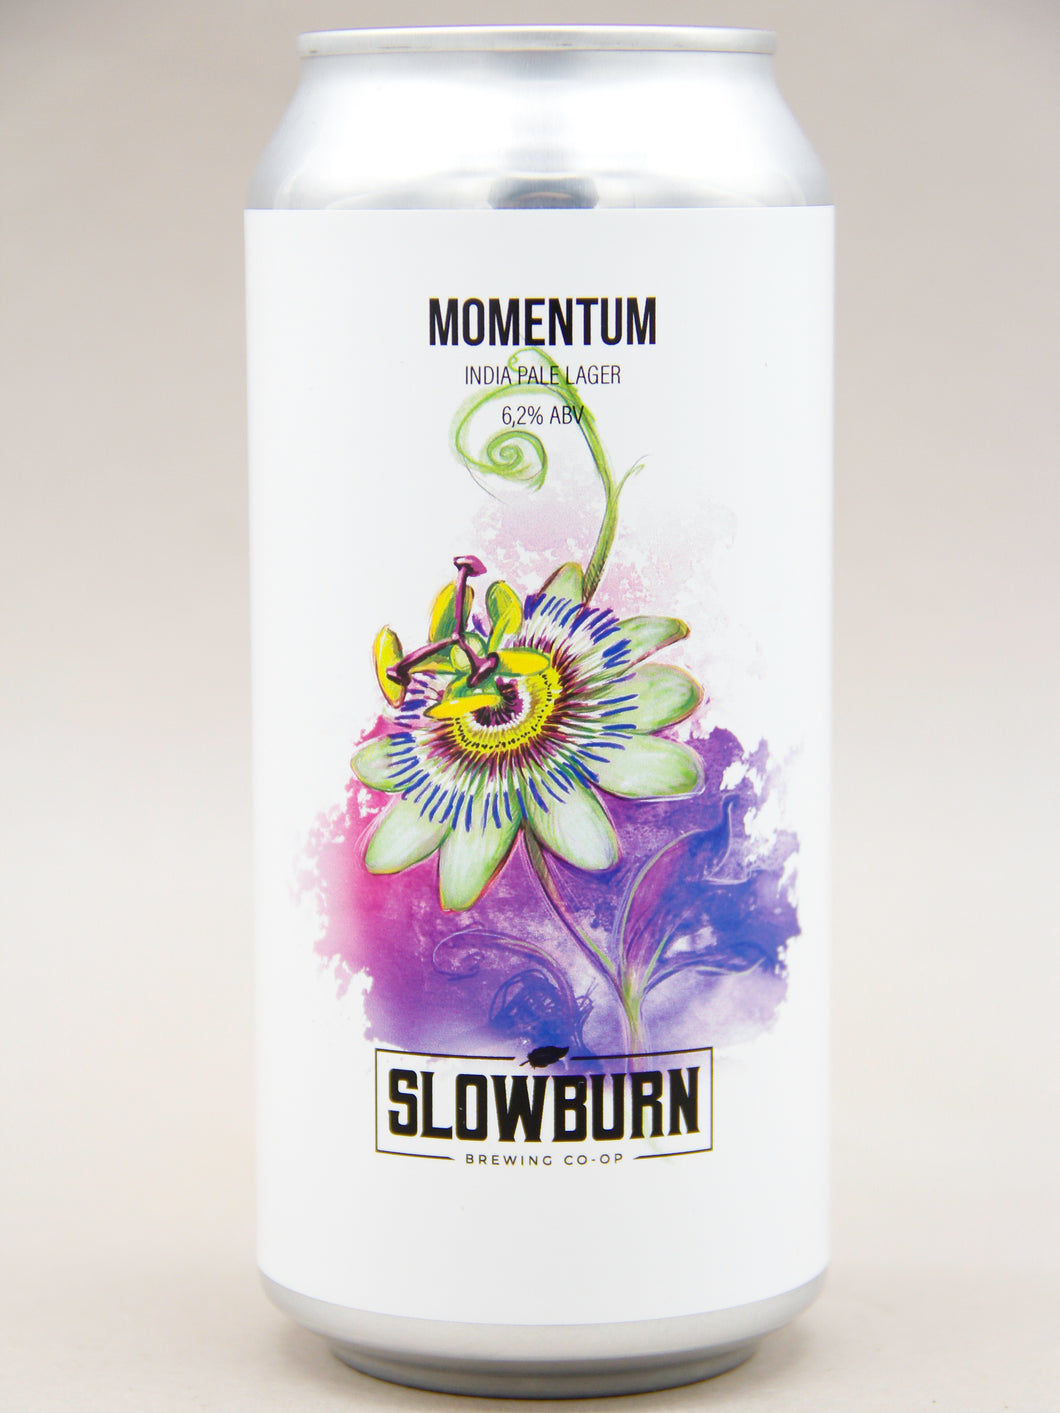 Slowburn: Momentum, India Pale Lager (6.2%, 44cl CAN)